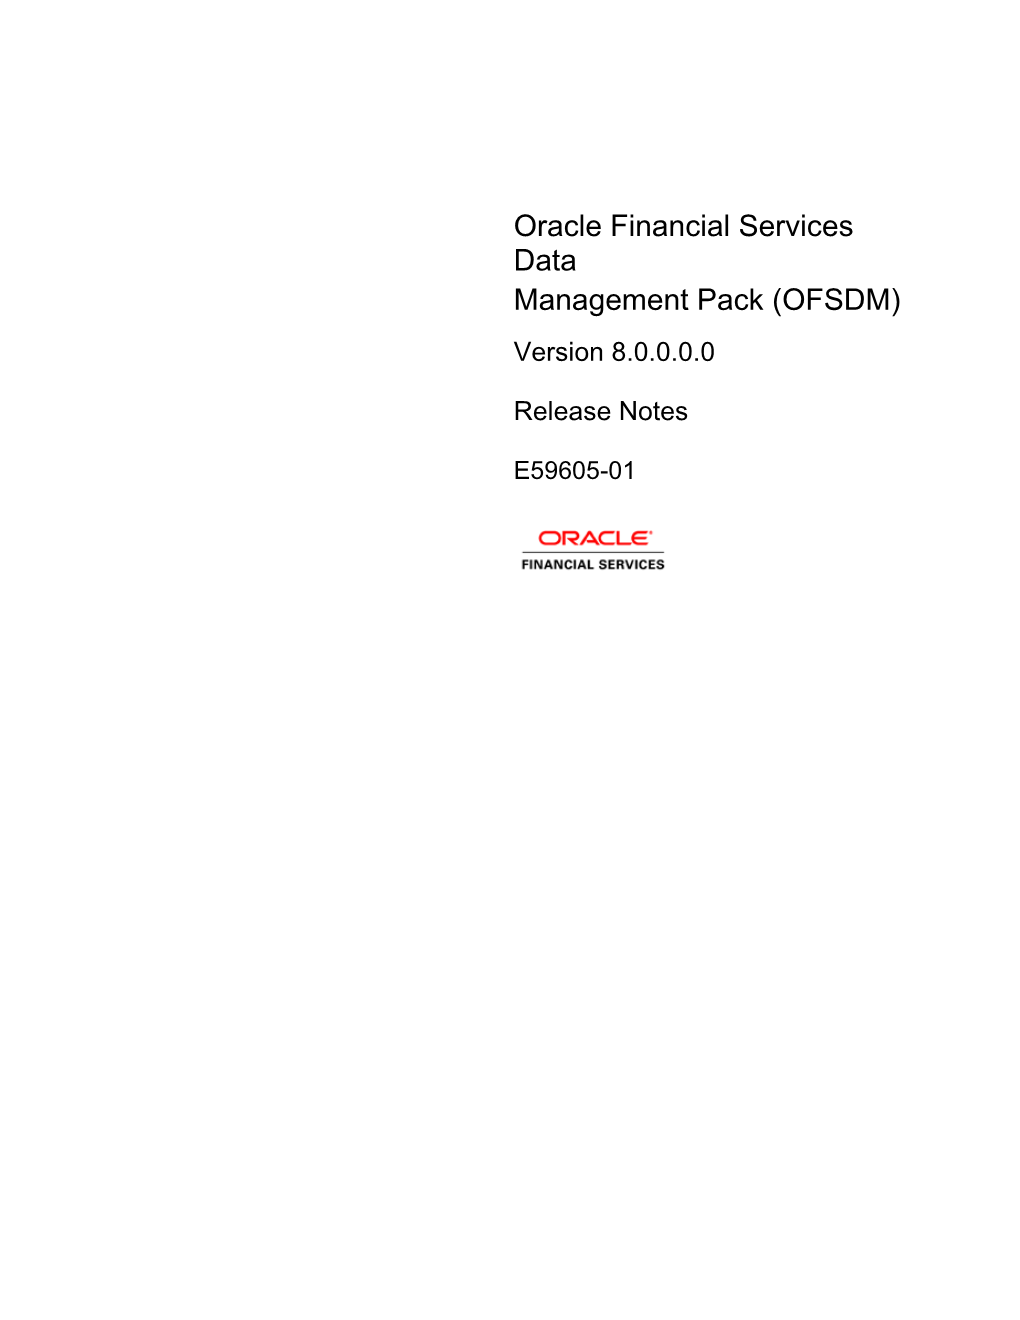 Oracle Financial Services Data Management Pack (OFSDM)